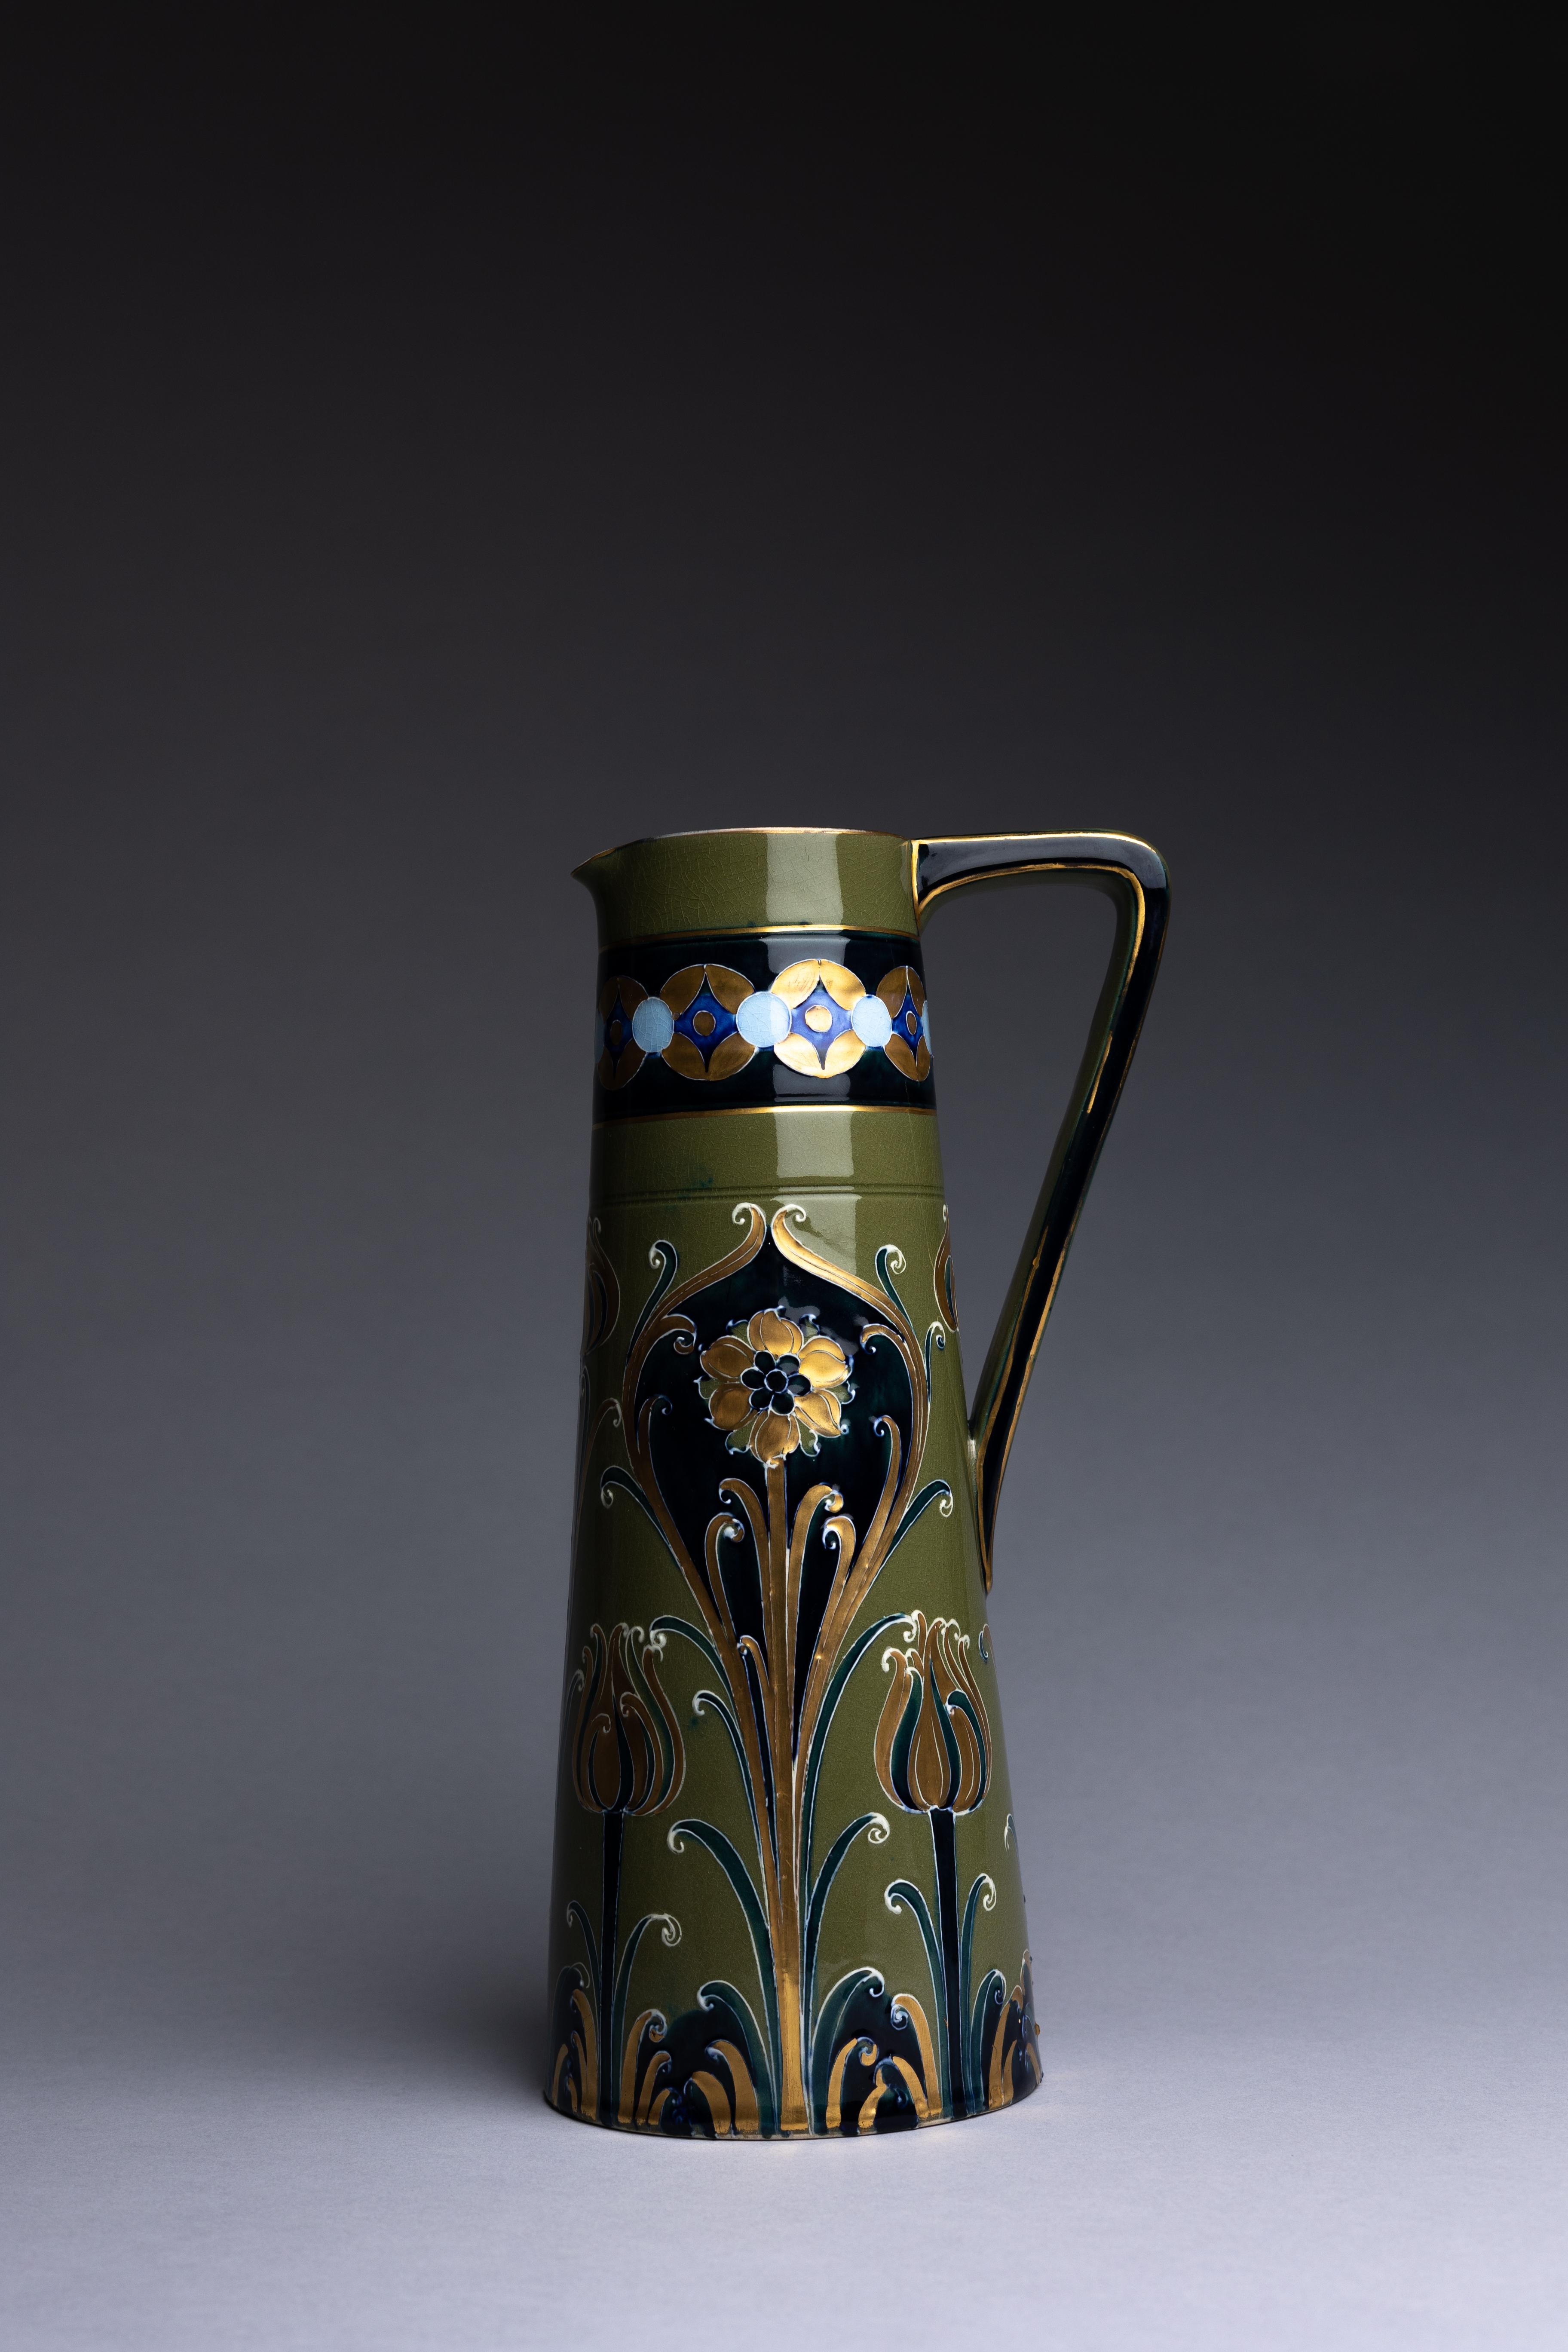 A decorative pottery pitcher created by William Moorcroft for James MacIntyre & Co. in 1903.

This pitcher is part of William Moorcroft's Green and Gold Florian line. In producing these wares, Moorcroft utilized a medieval ceramic technique of